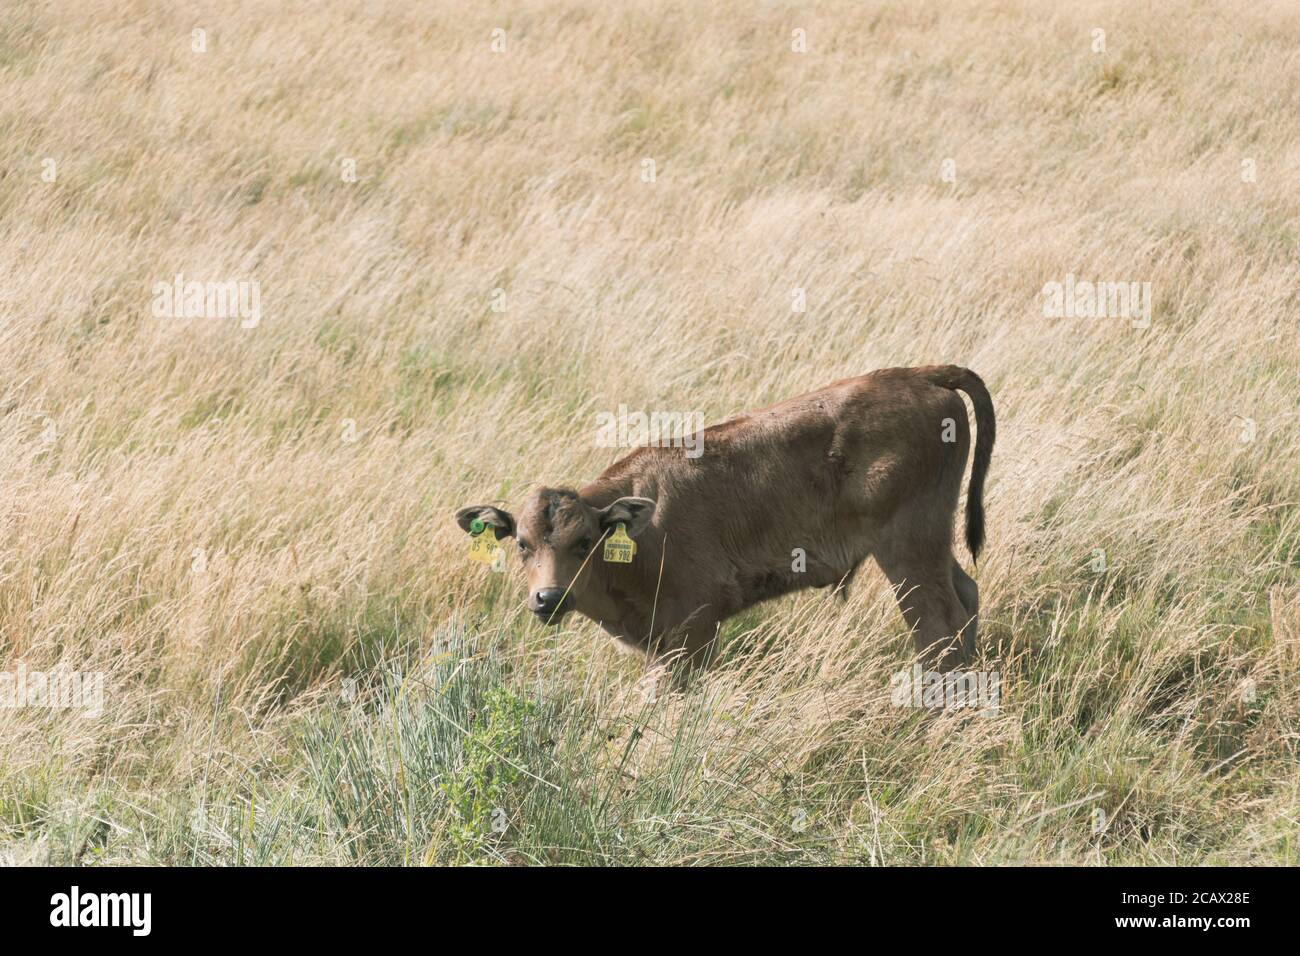 A brown calf is standing in a field of high grass looking at the camera. Royalty free stock photo. Stock Photo